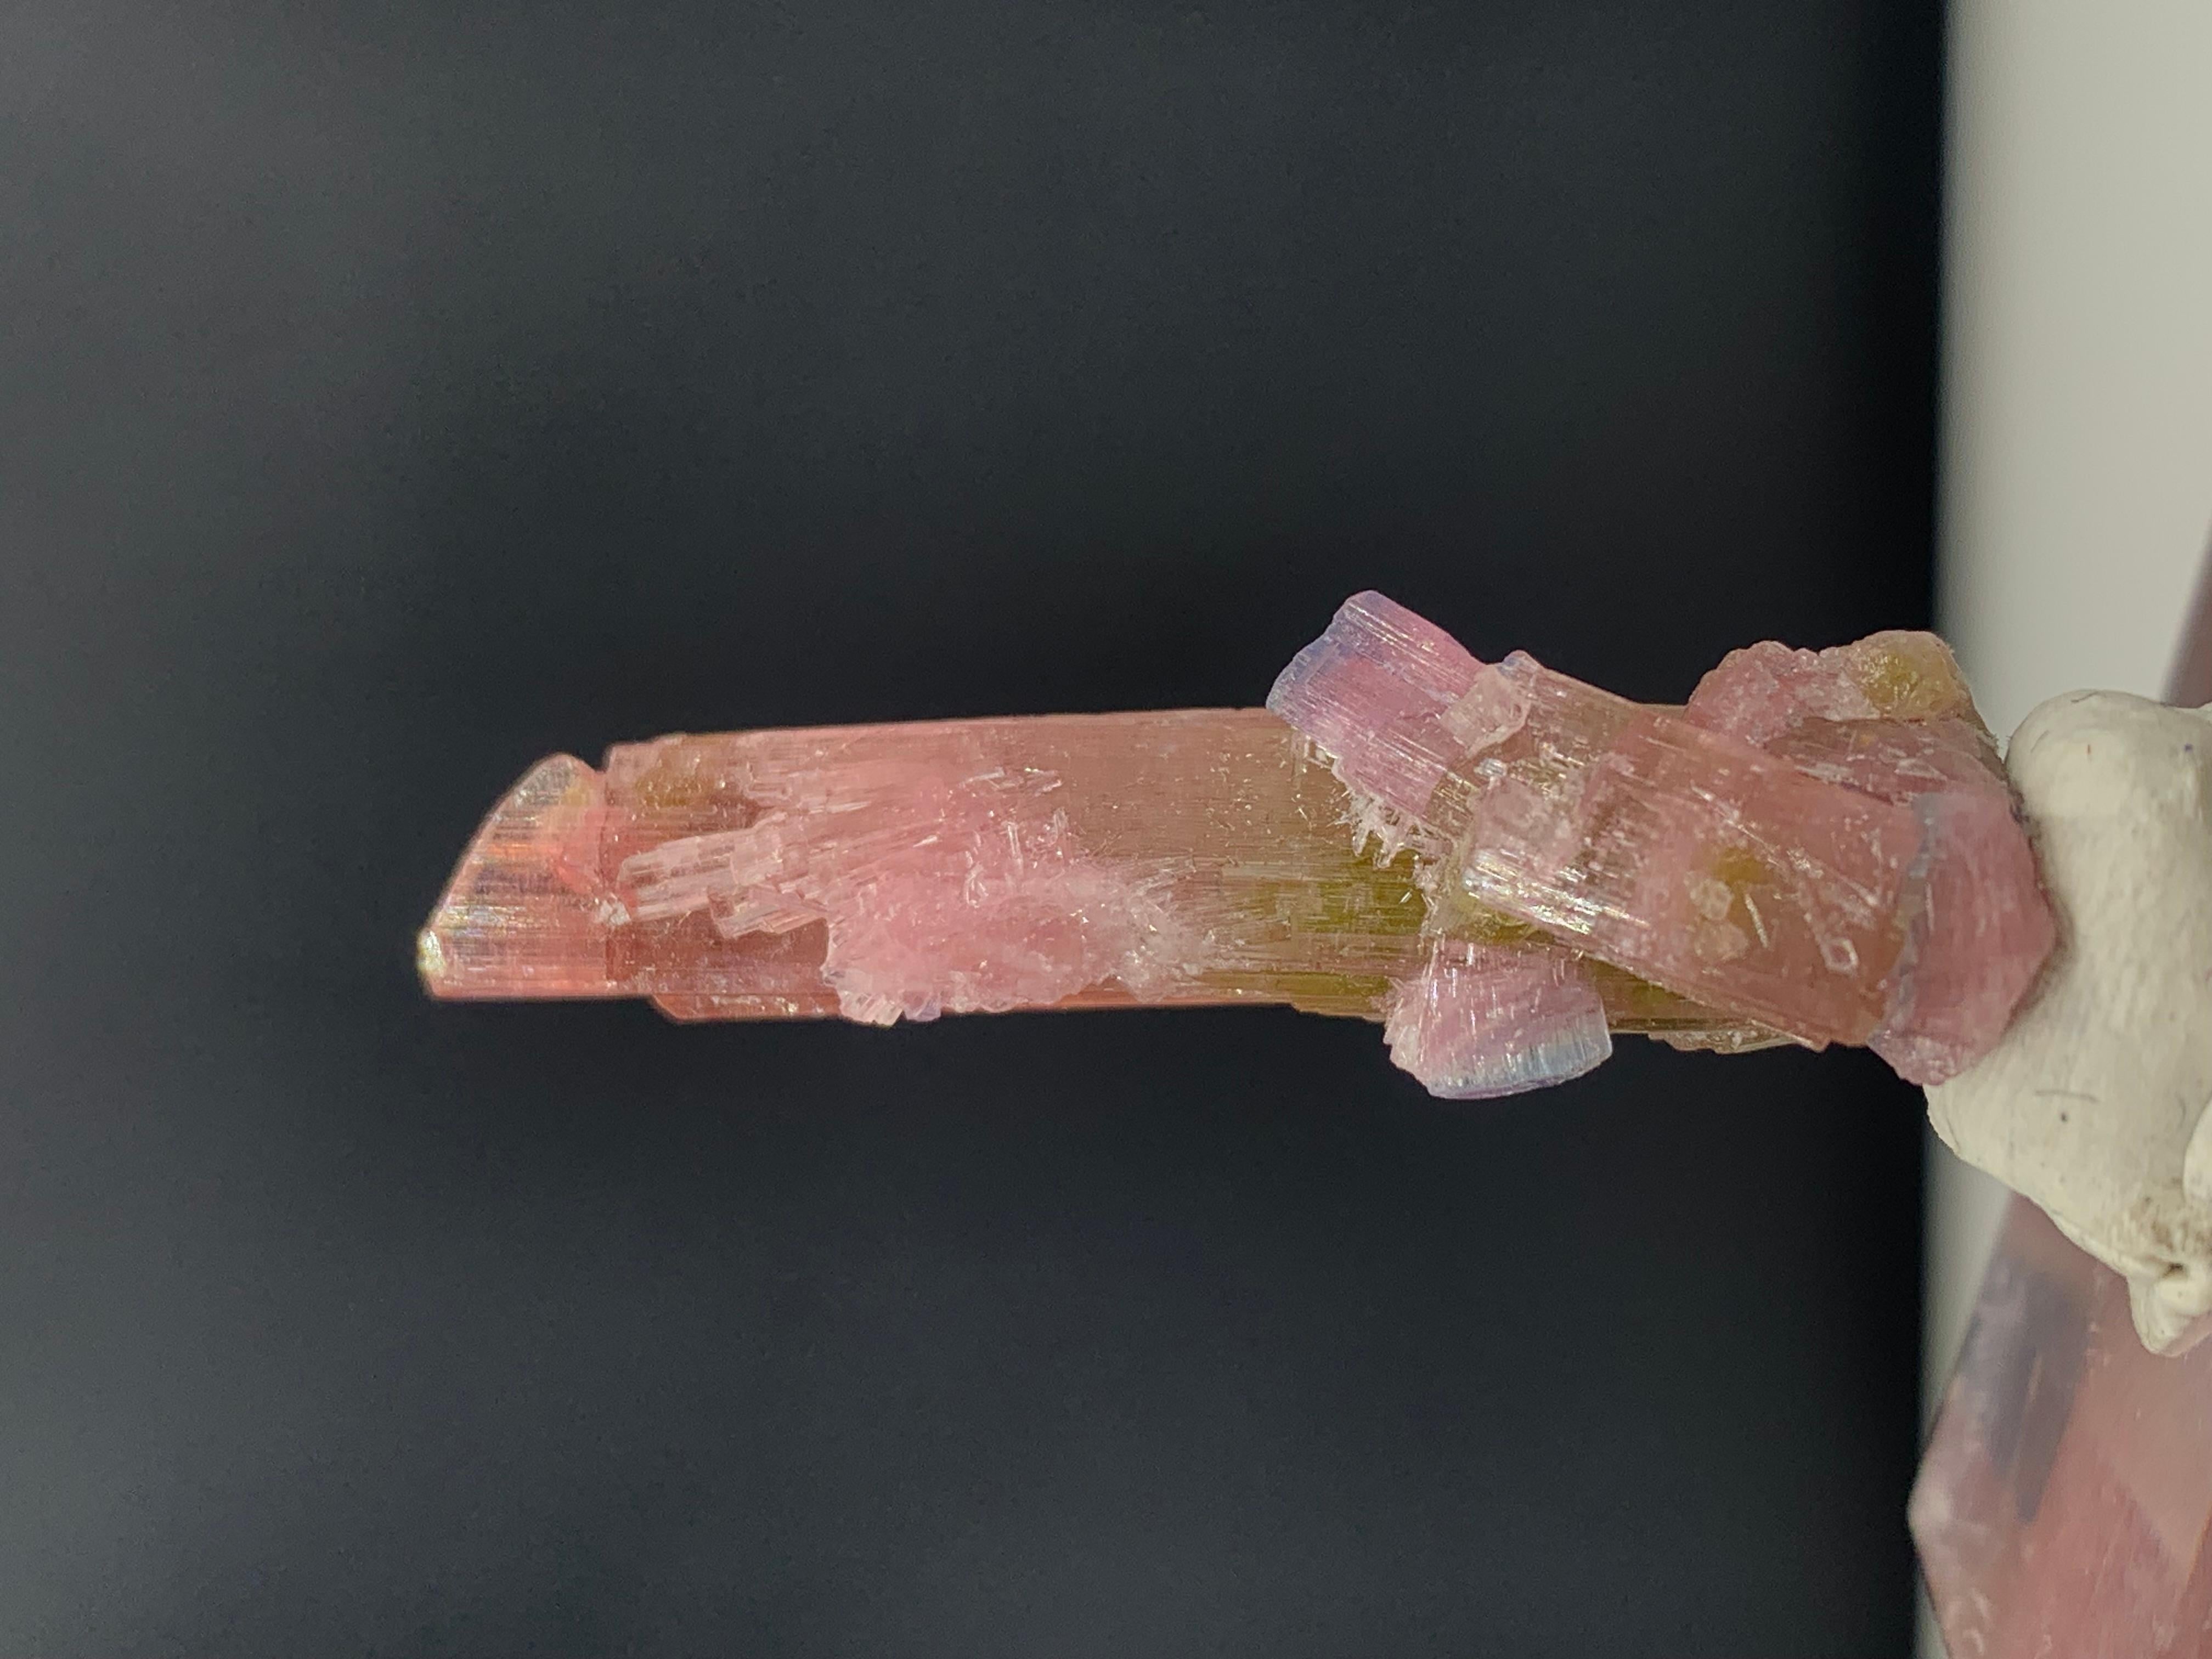 Incredible Bi-Color Tourmaline Crystal From Afghanistan
WEIGHT: 35.75 Carat
DIMENSIONS: 3.9 x 1.9 x 1 Cm
ORIGIN: Afghanistan
COLOR: Pink And Green
TREATMENT: None

Tourmaline is an extremely popular gemstone; the name Tourmaline is derived